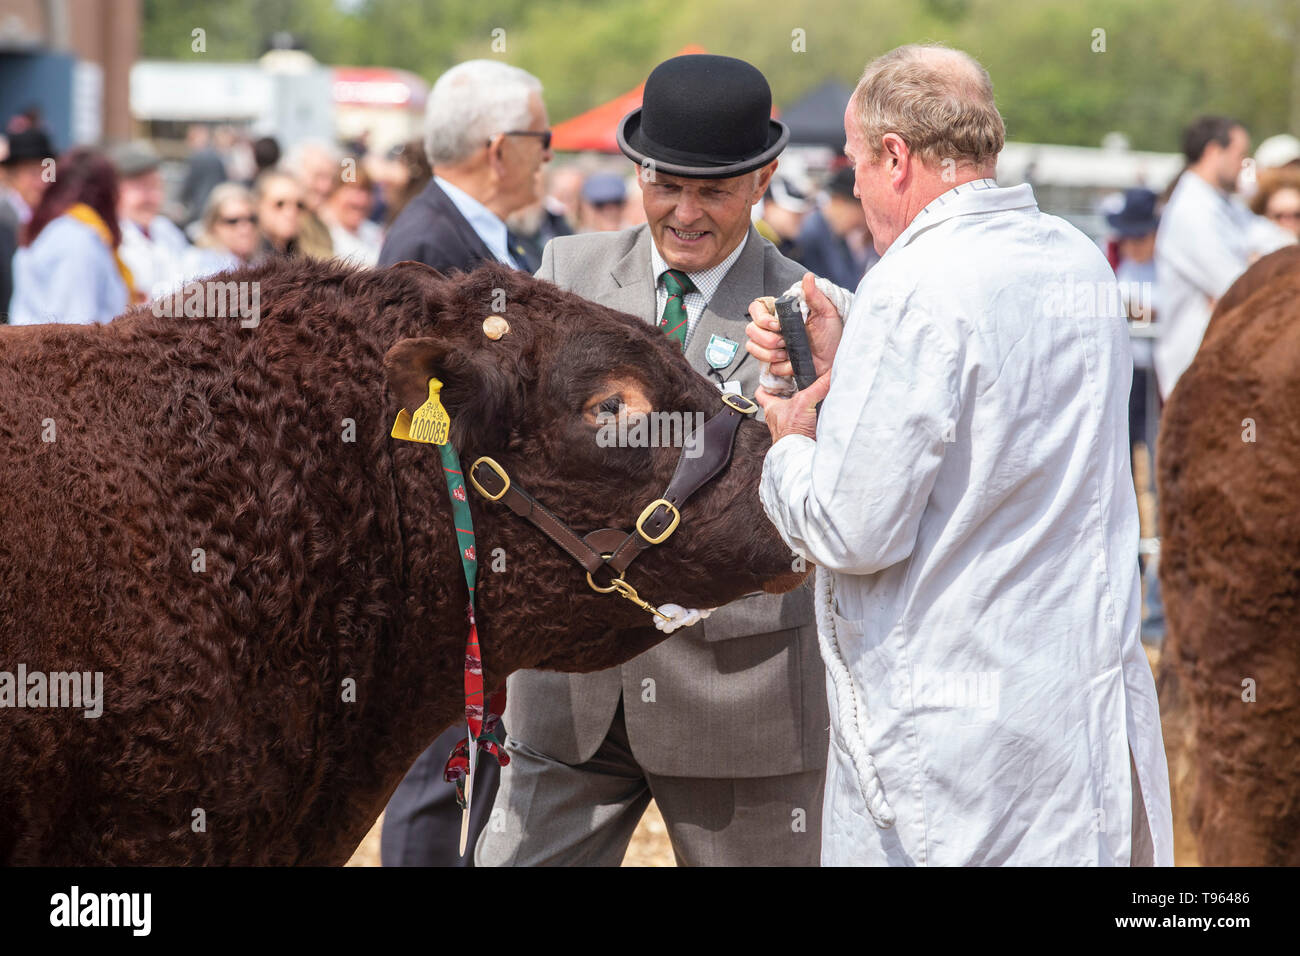 Judgin g the local Ruby Red Devon cattle at the Devon County Show, 2019 Stock Photo